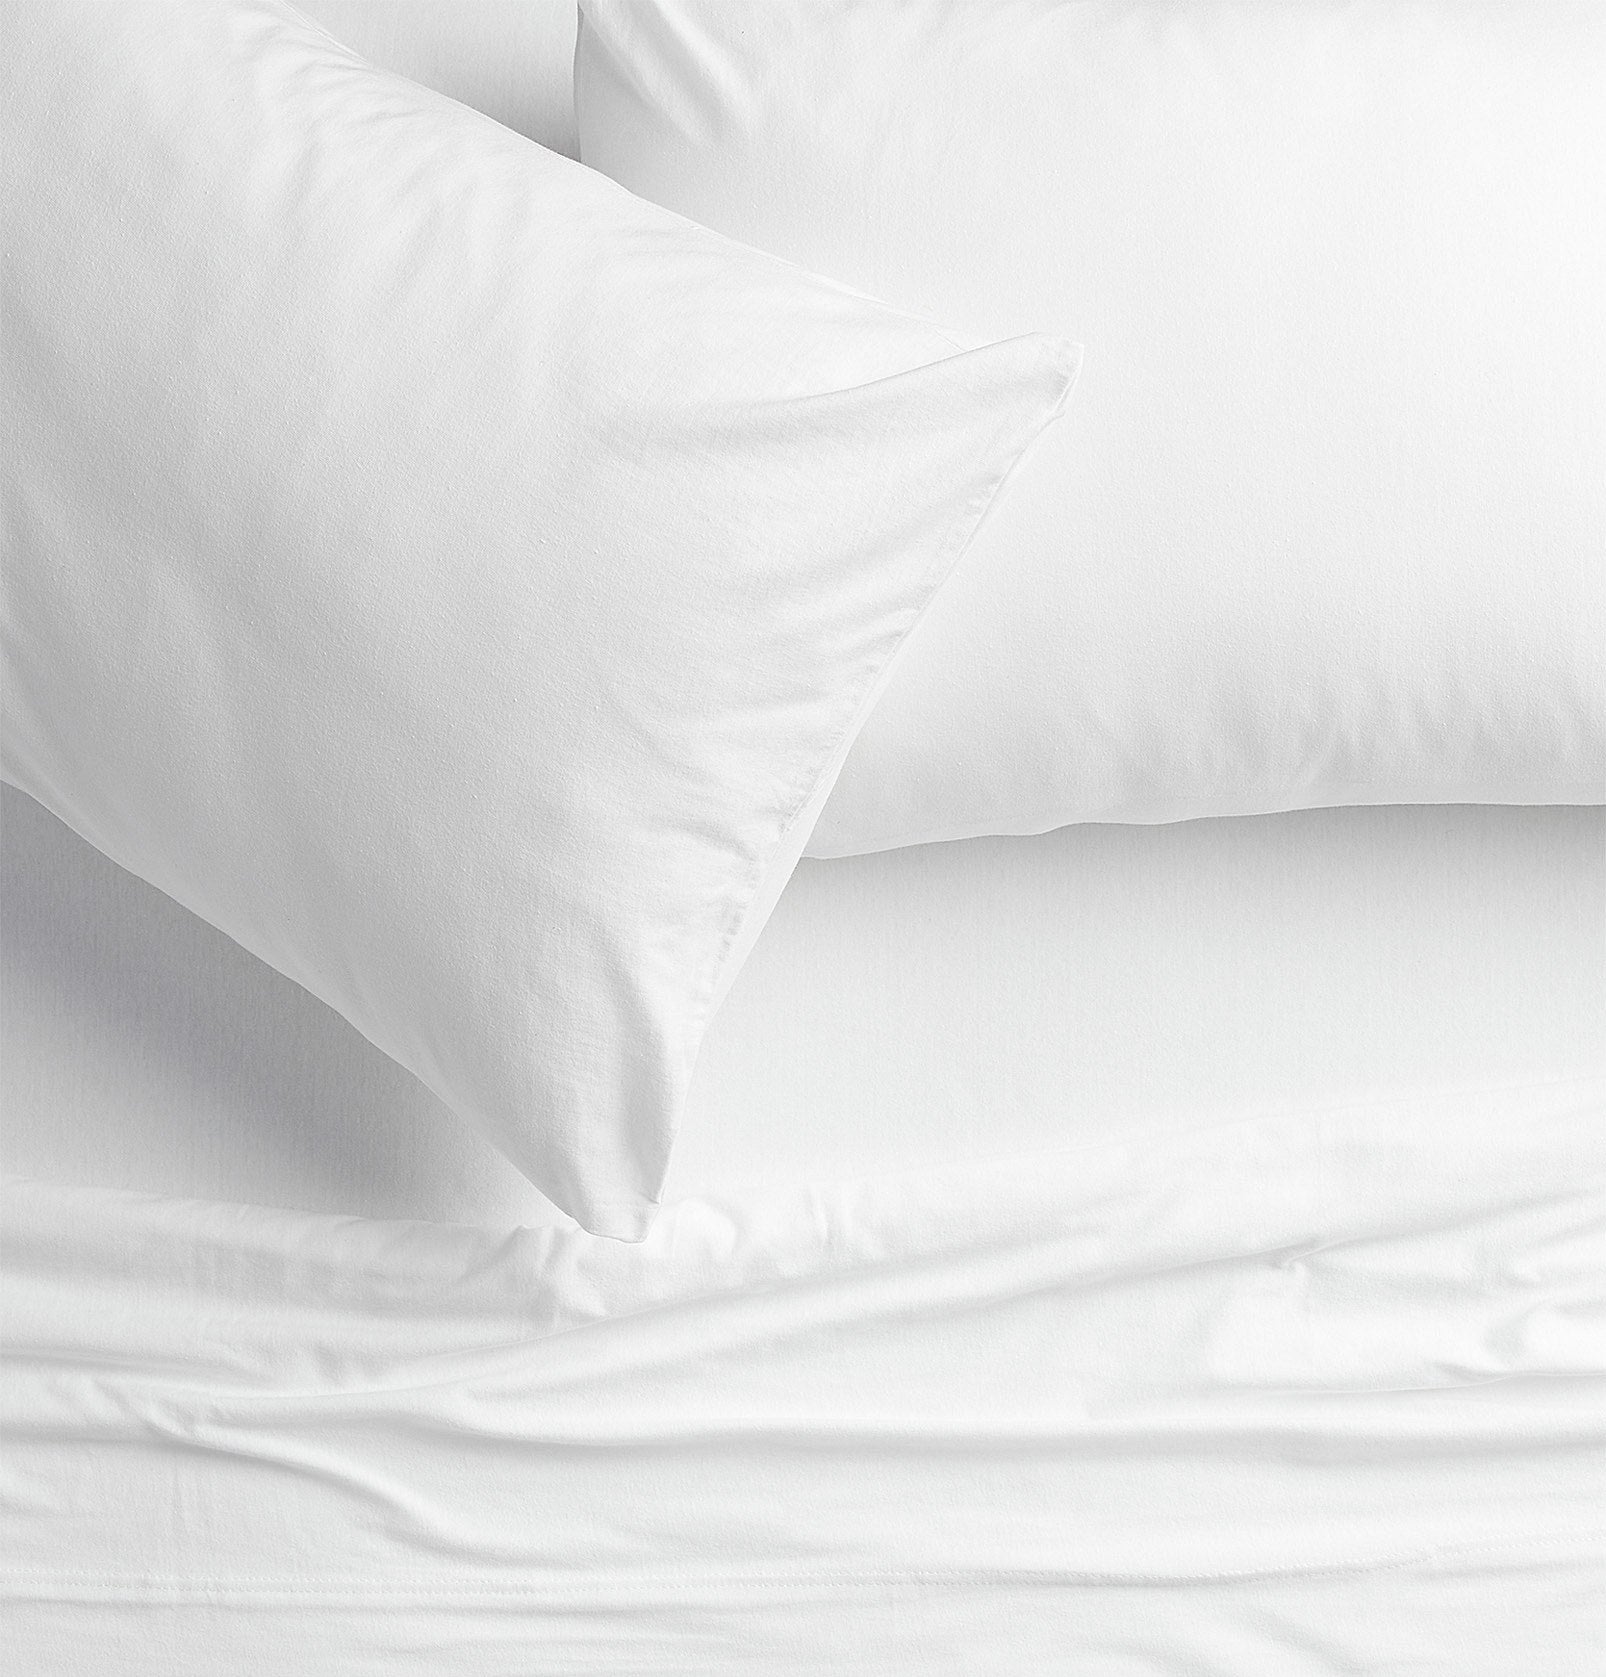 Two pillows on a bed with a top sheet